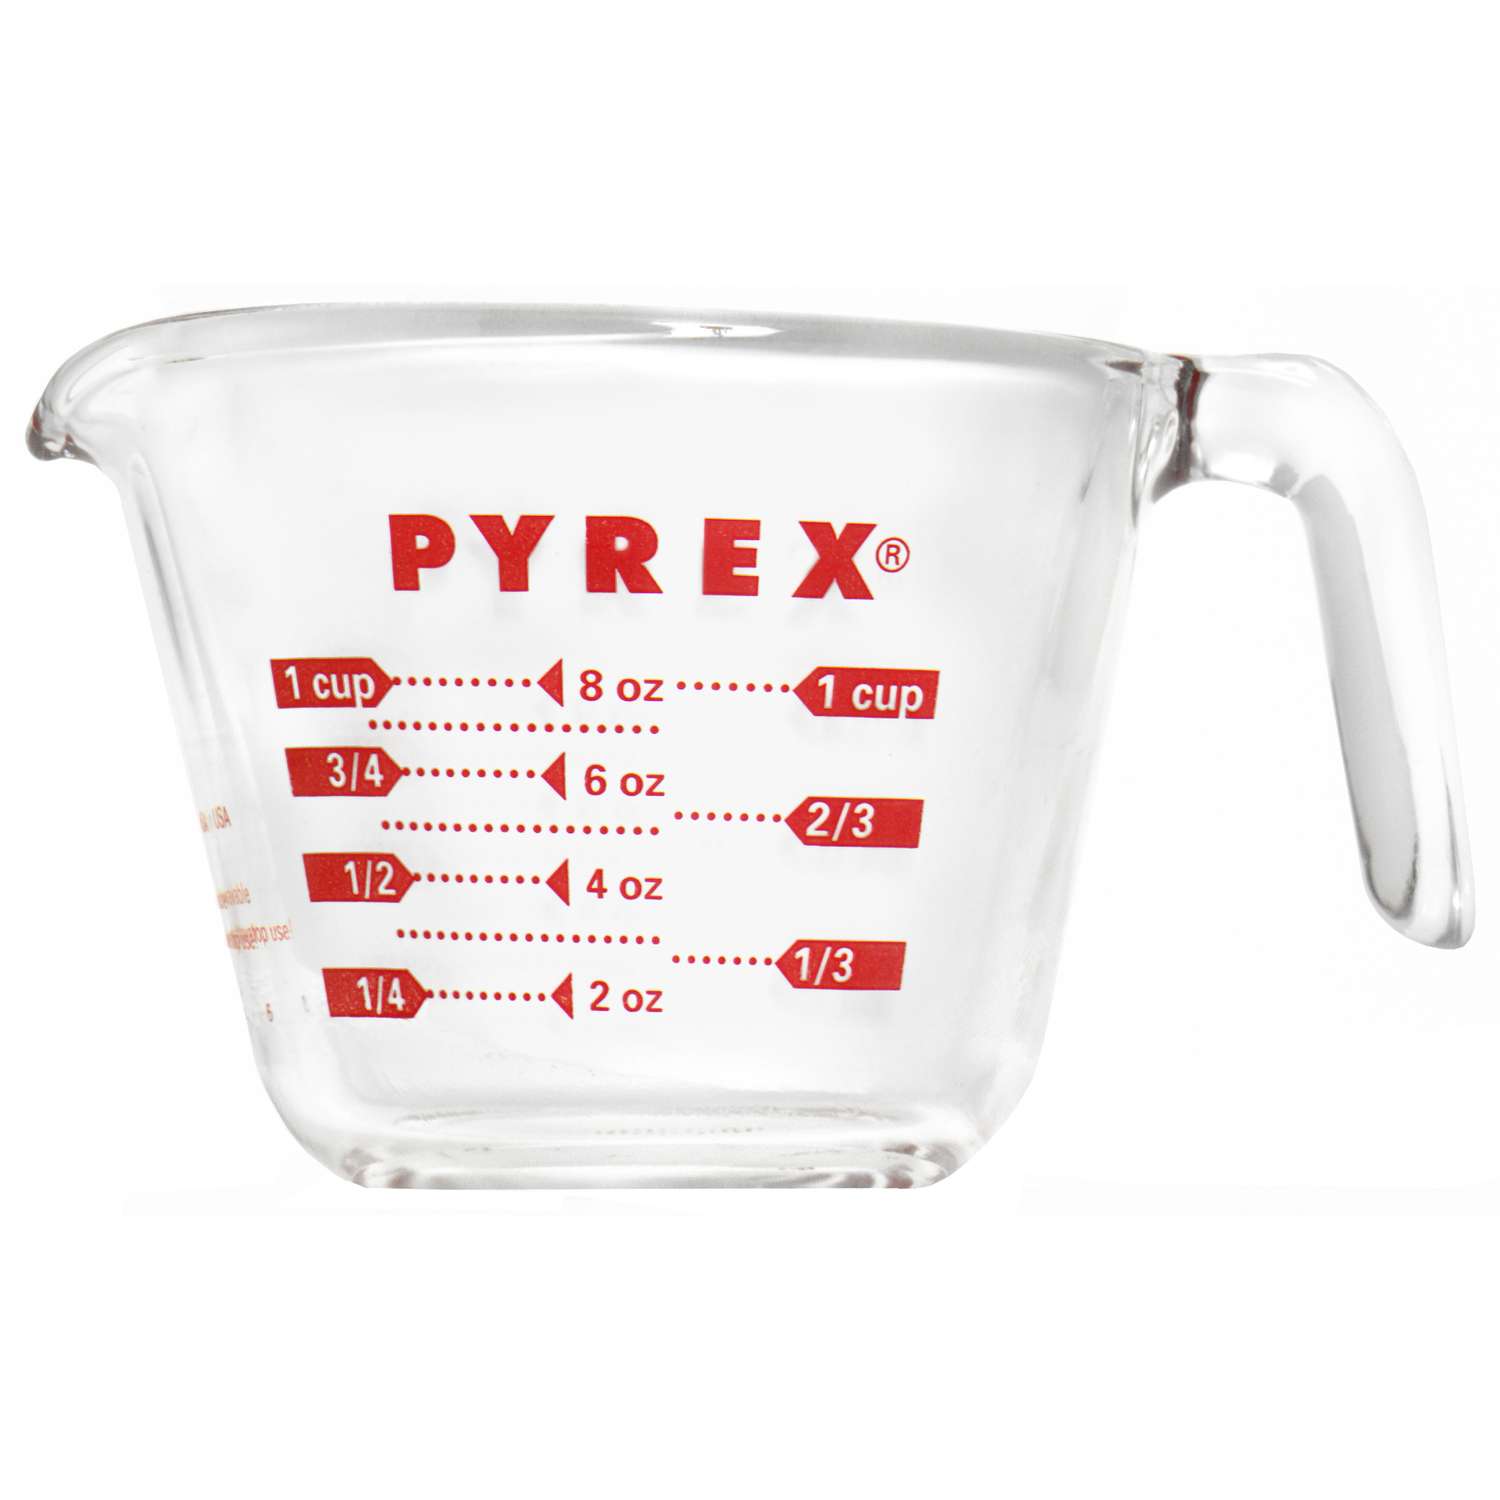 8 Cup Liquid Glass Measuring Cup with Plastic Lid - Made By Design